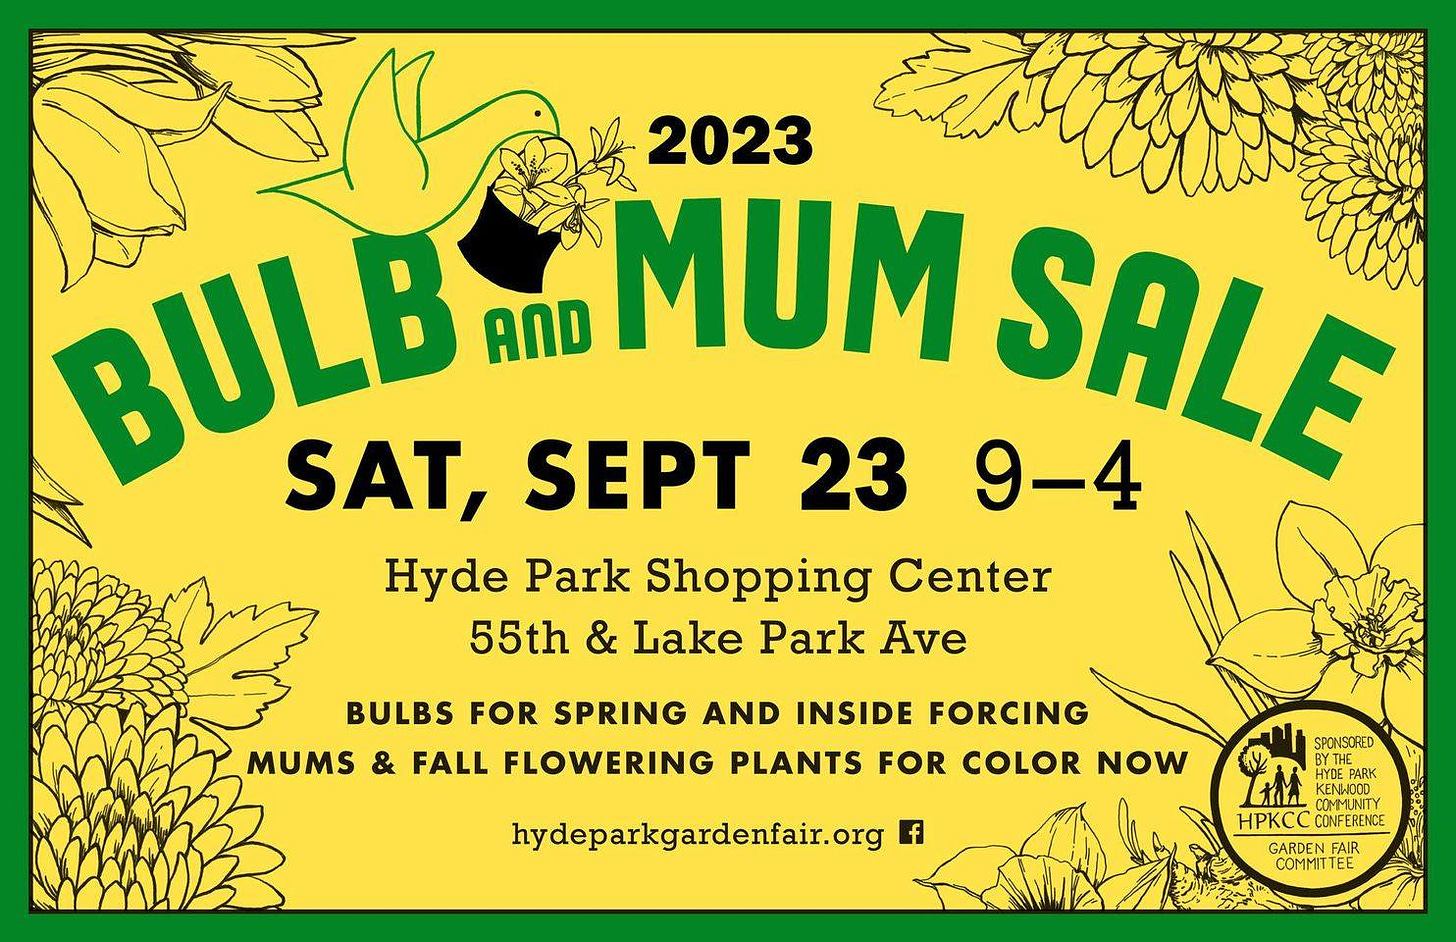 May be an image of text that says '2023 BULB SAT, SEPT AND MUM 9-4 SALE 23 Hyde Park Shopping Center 55th & Lake Park Ave BULBS FOR SPRING AND INSIDE FORCING MUMS FALL FLOWERING PLANTS FOR COLOR NOW f hydeparkgardenfair.org SPONSORED B HPKCC CONFERENCE LAM mH M COMMUNITY GARDEN FAIR COMMIT ee'